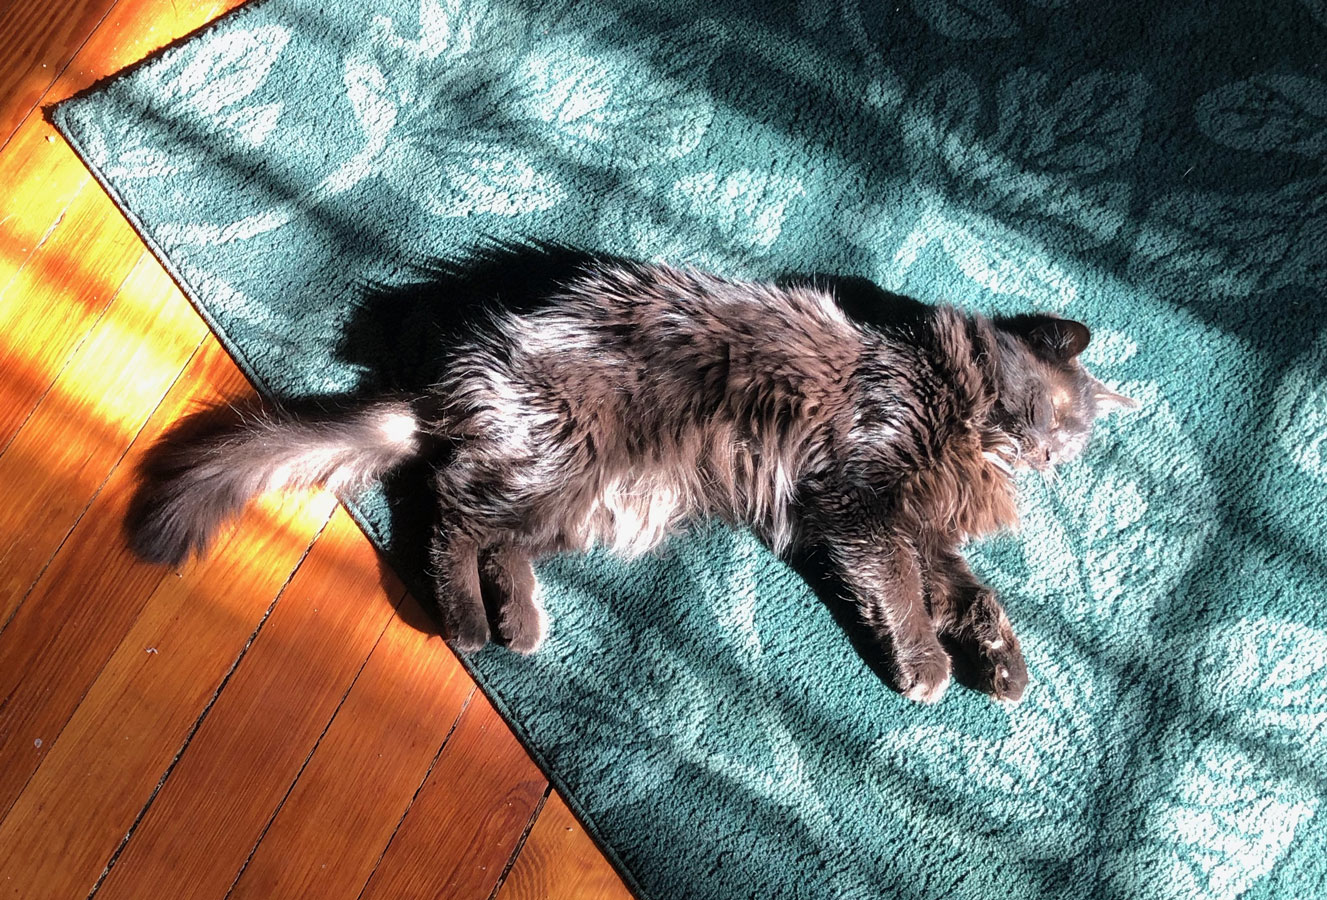 A black cat sun bathes and naps on a green floral rug.